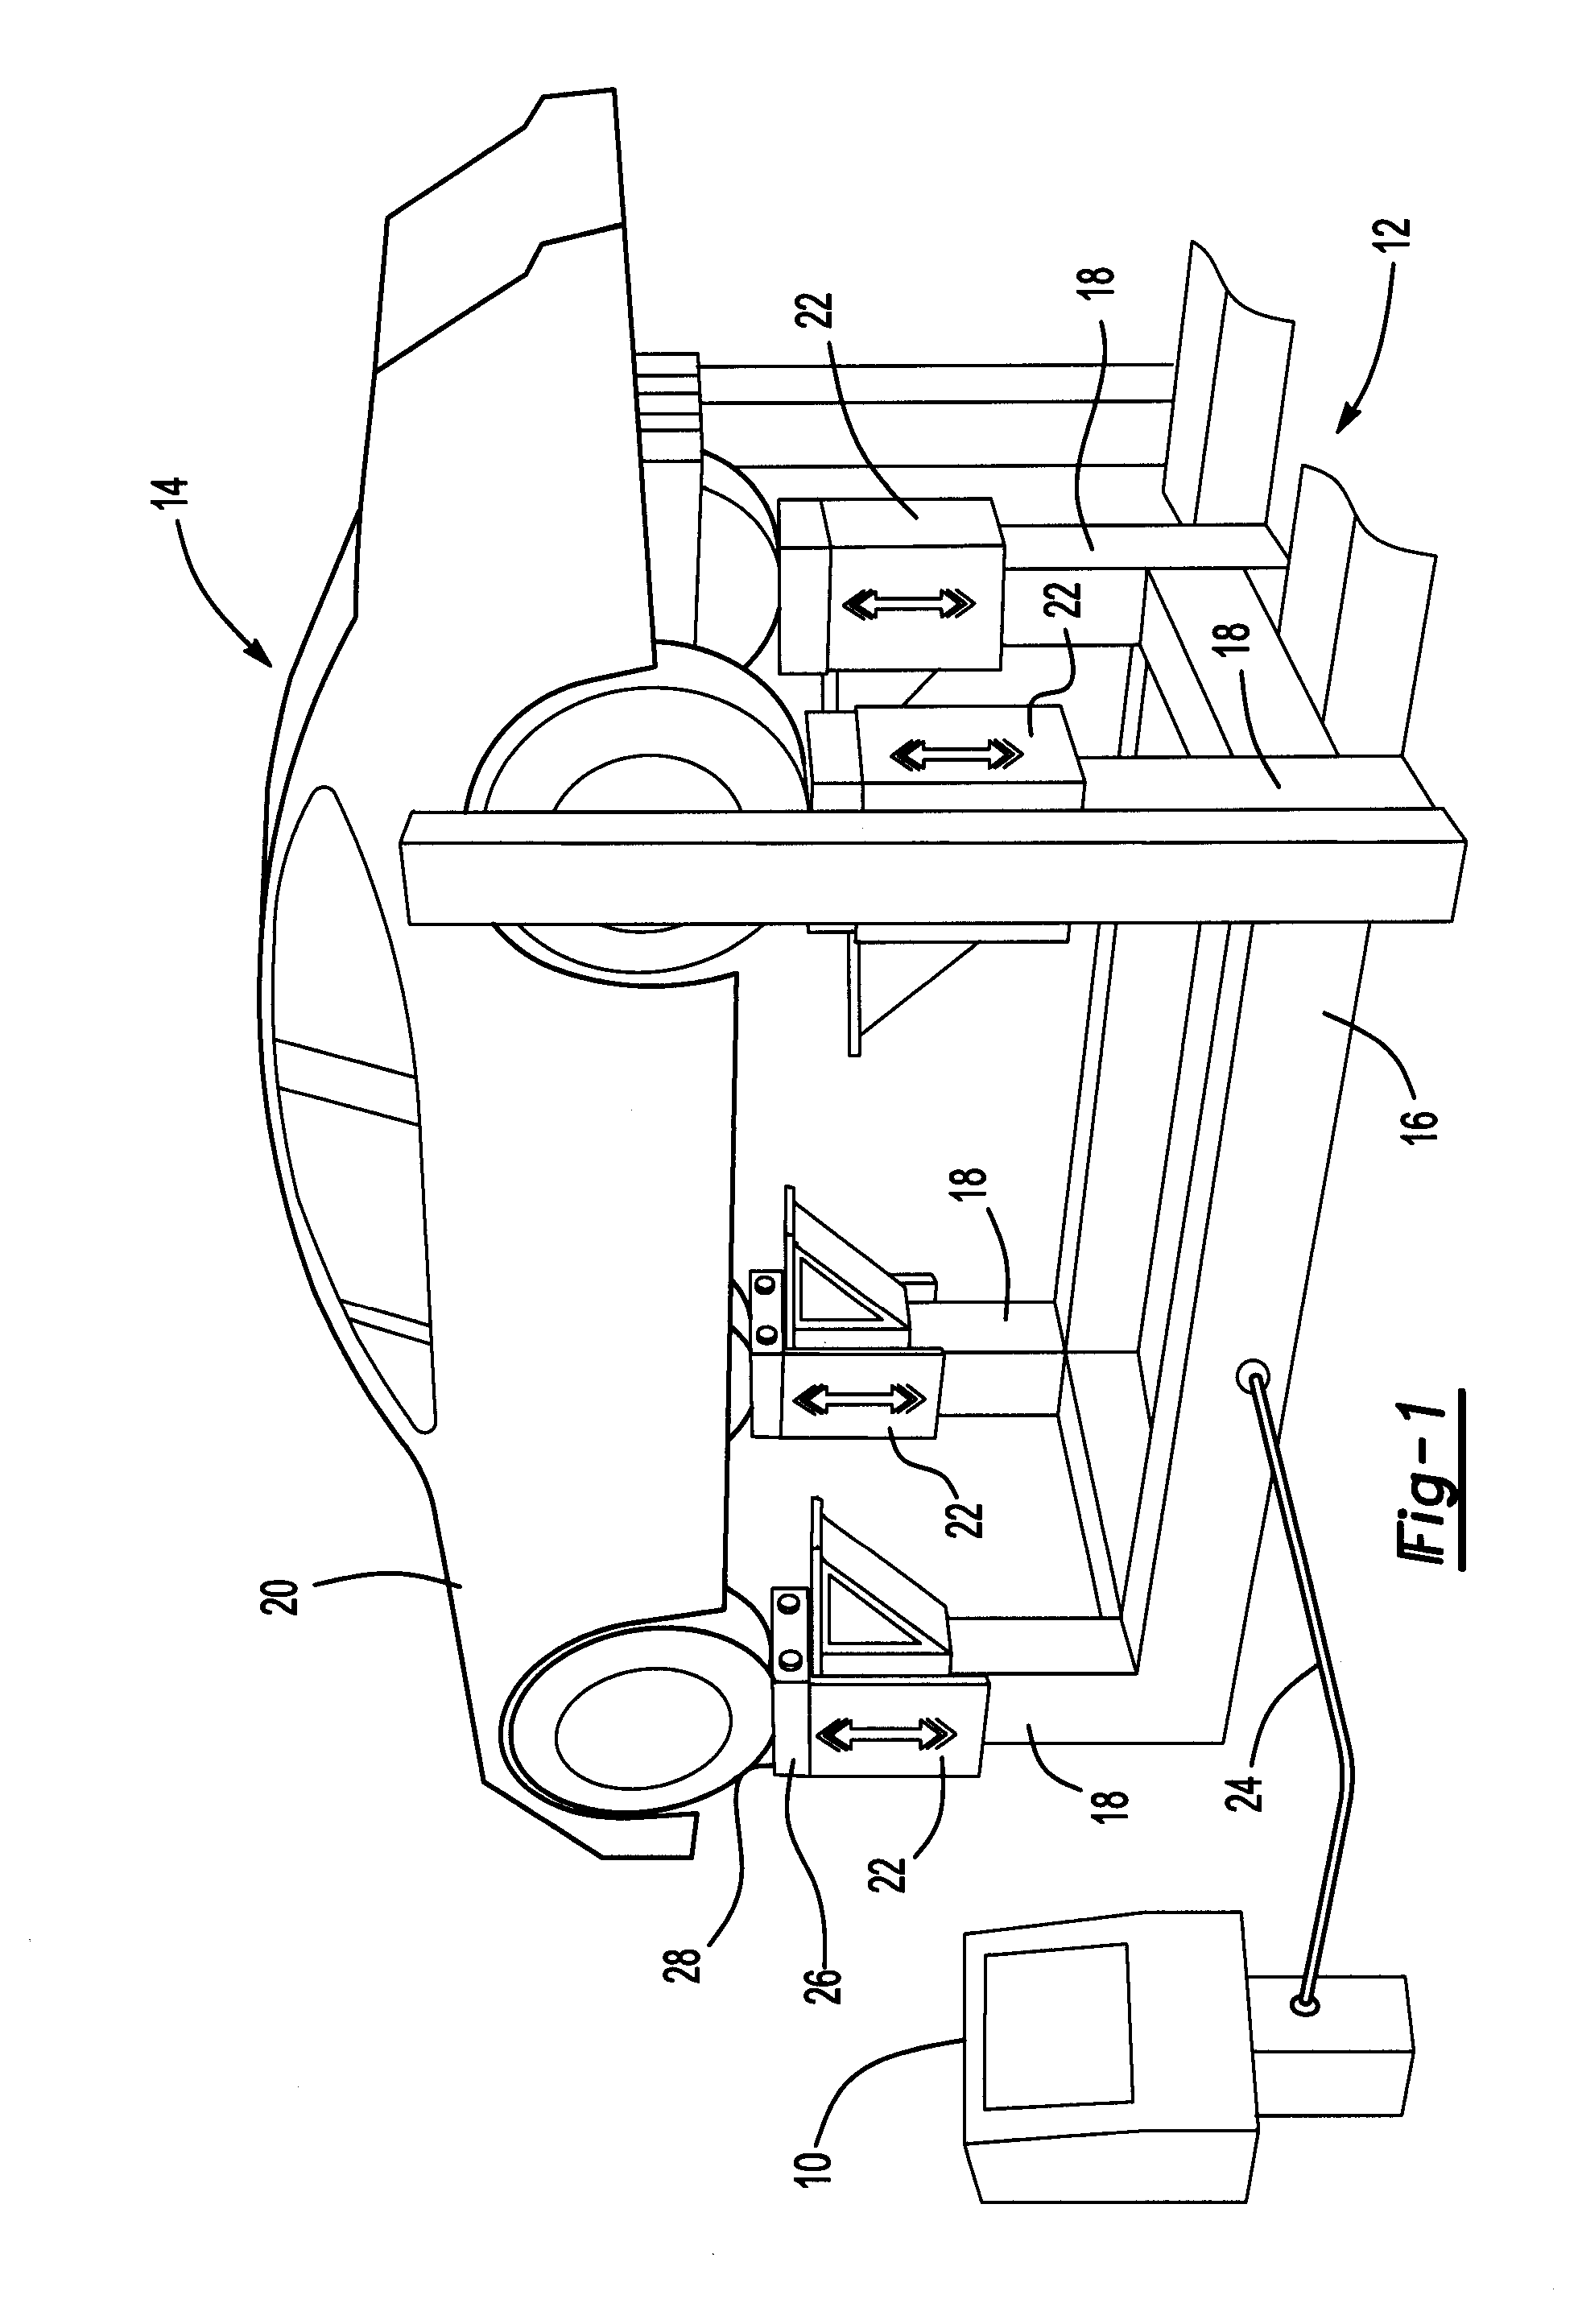 System and method for testing a vehicle suspension